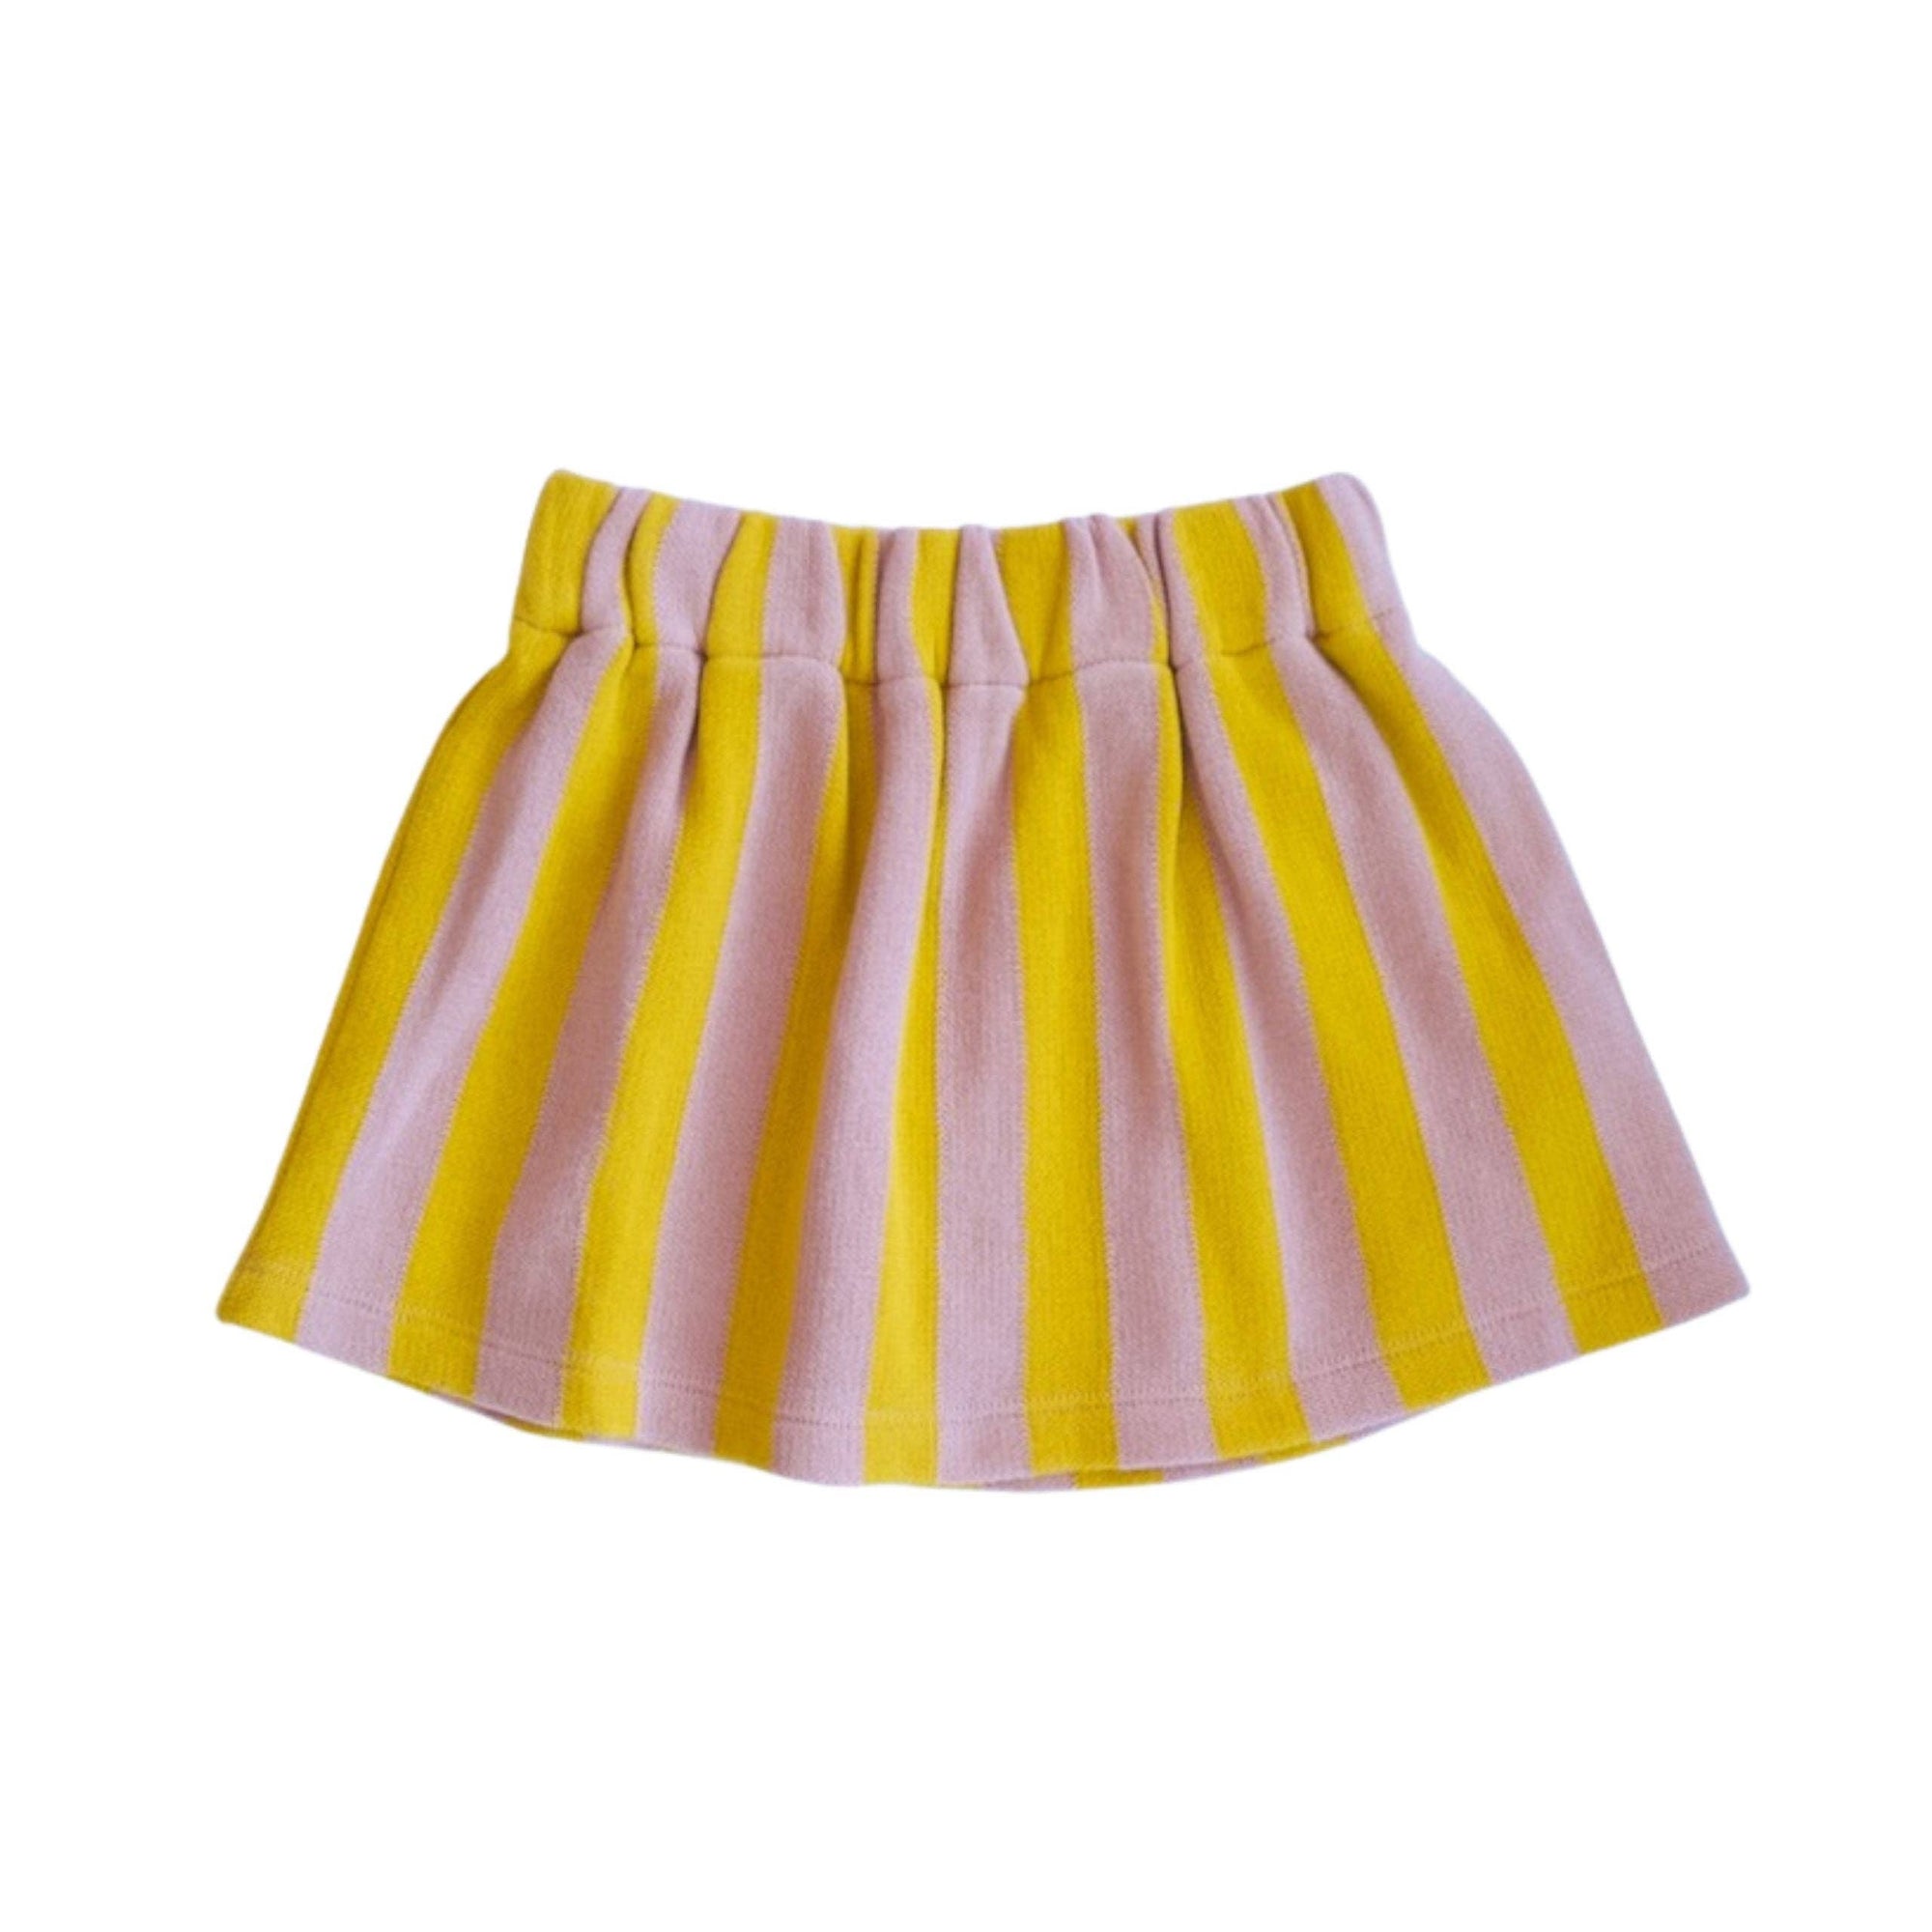 Knit Pink and Gold Stripe Skirt